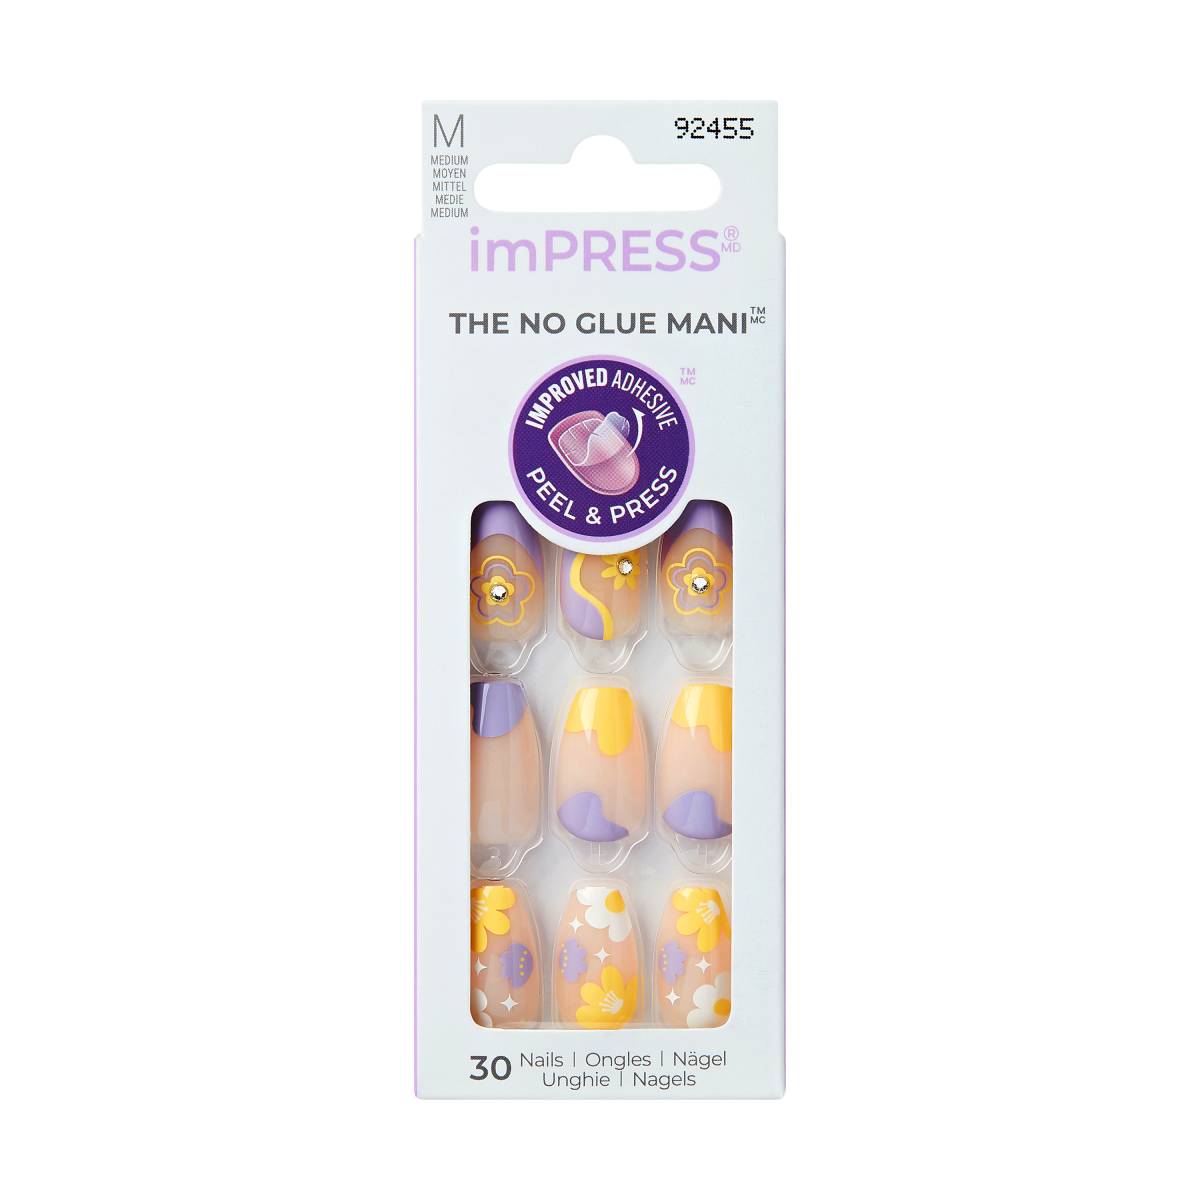 imPRESS Press-On Nails - Exciting Day